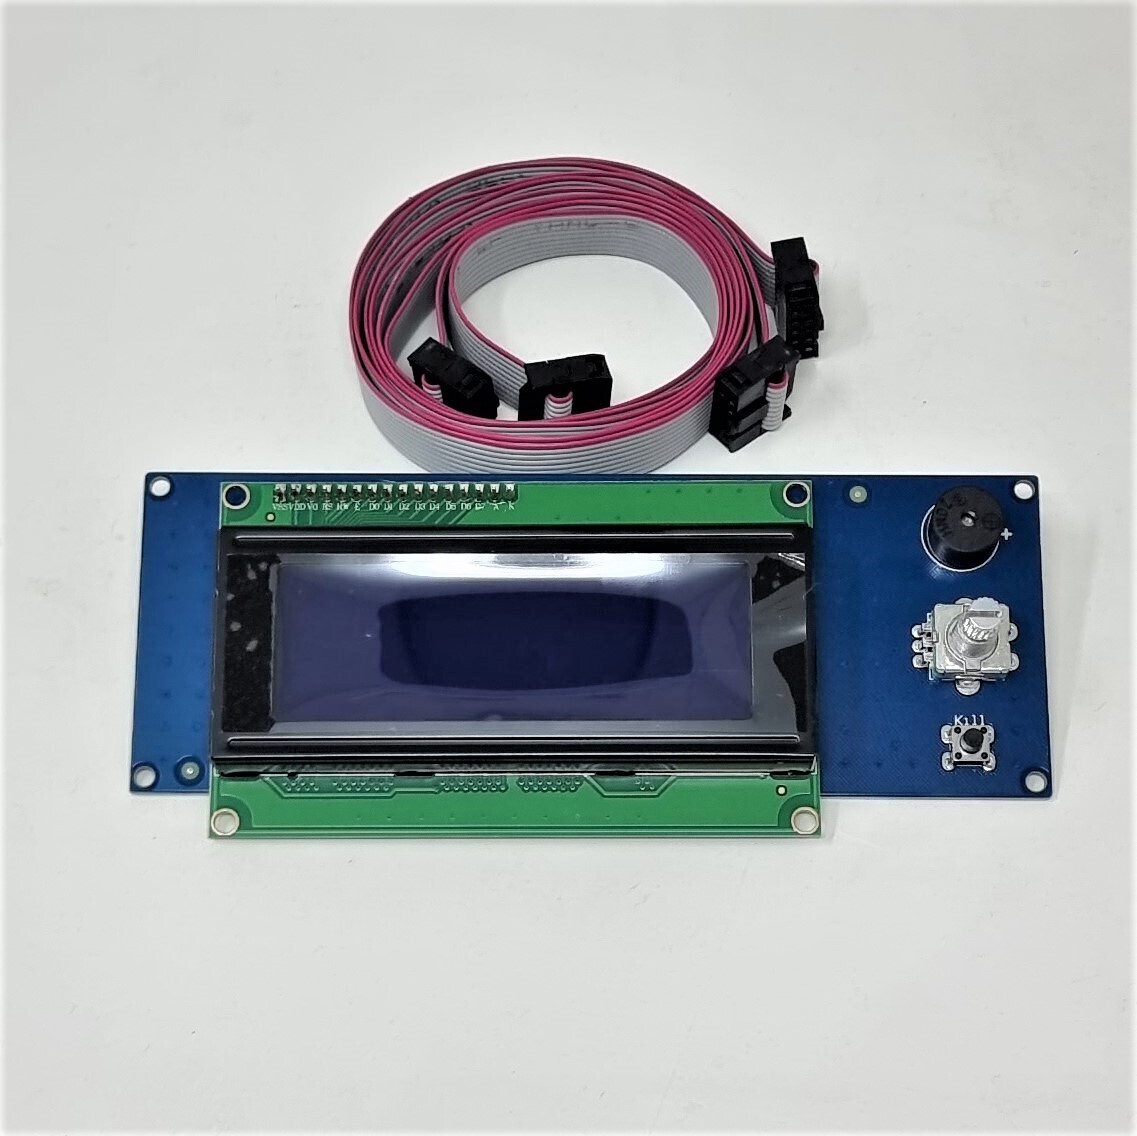 LCD Controller for Prusa i3 MK3S/Bear Upgrade